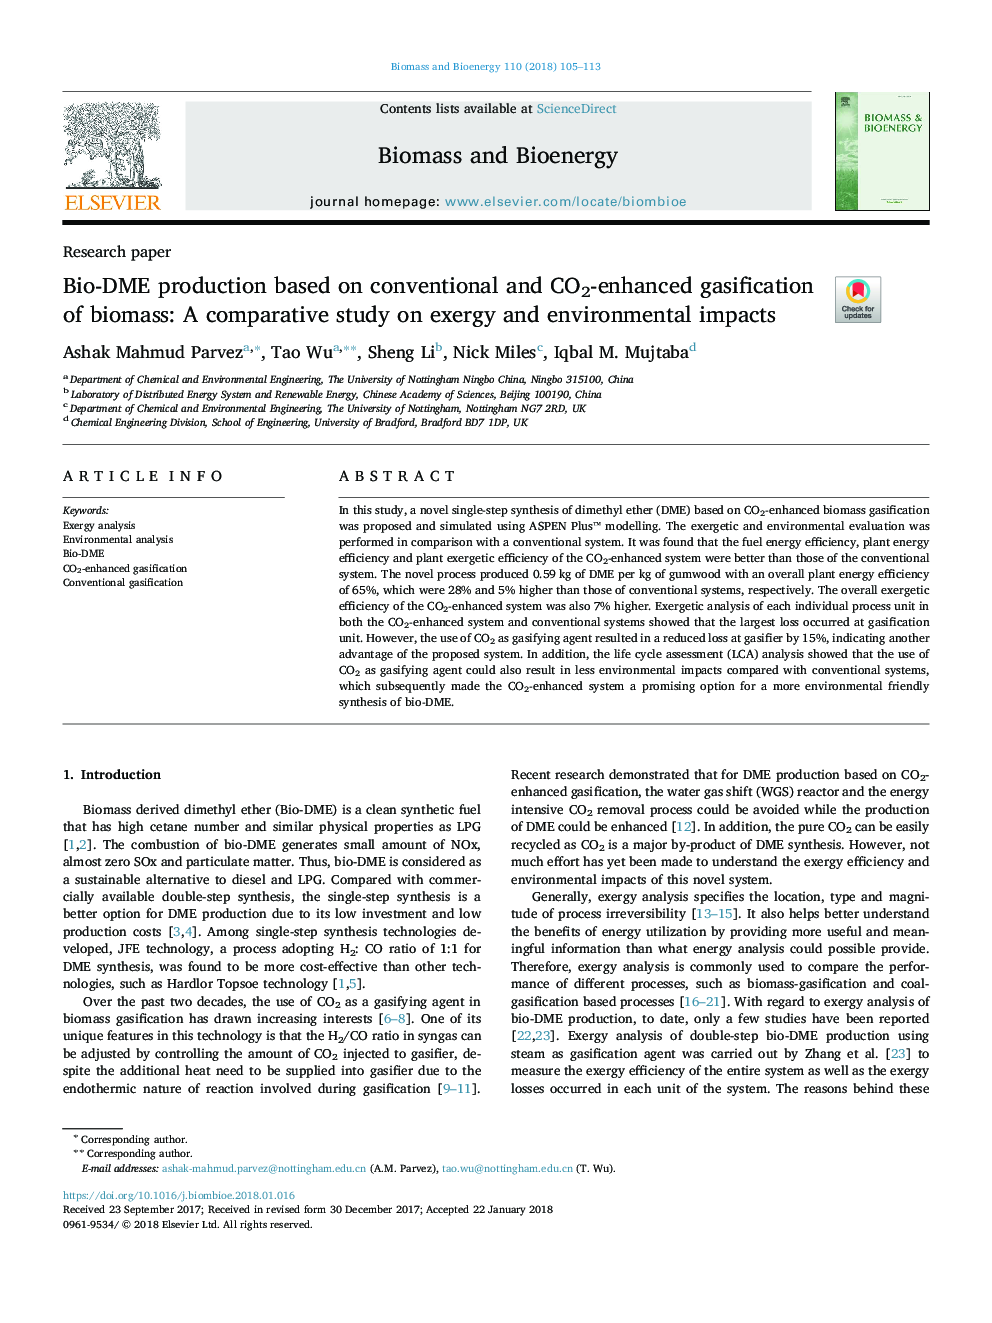 Bio-DME production based on conventional and CO2-enhanced gasification of biomass: A comparative study on exergy and environmental impacts